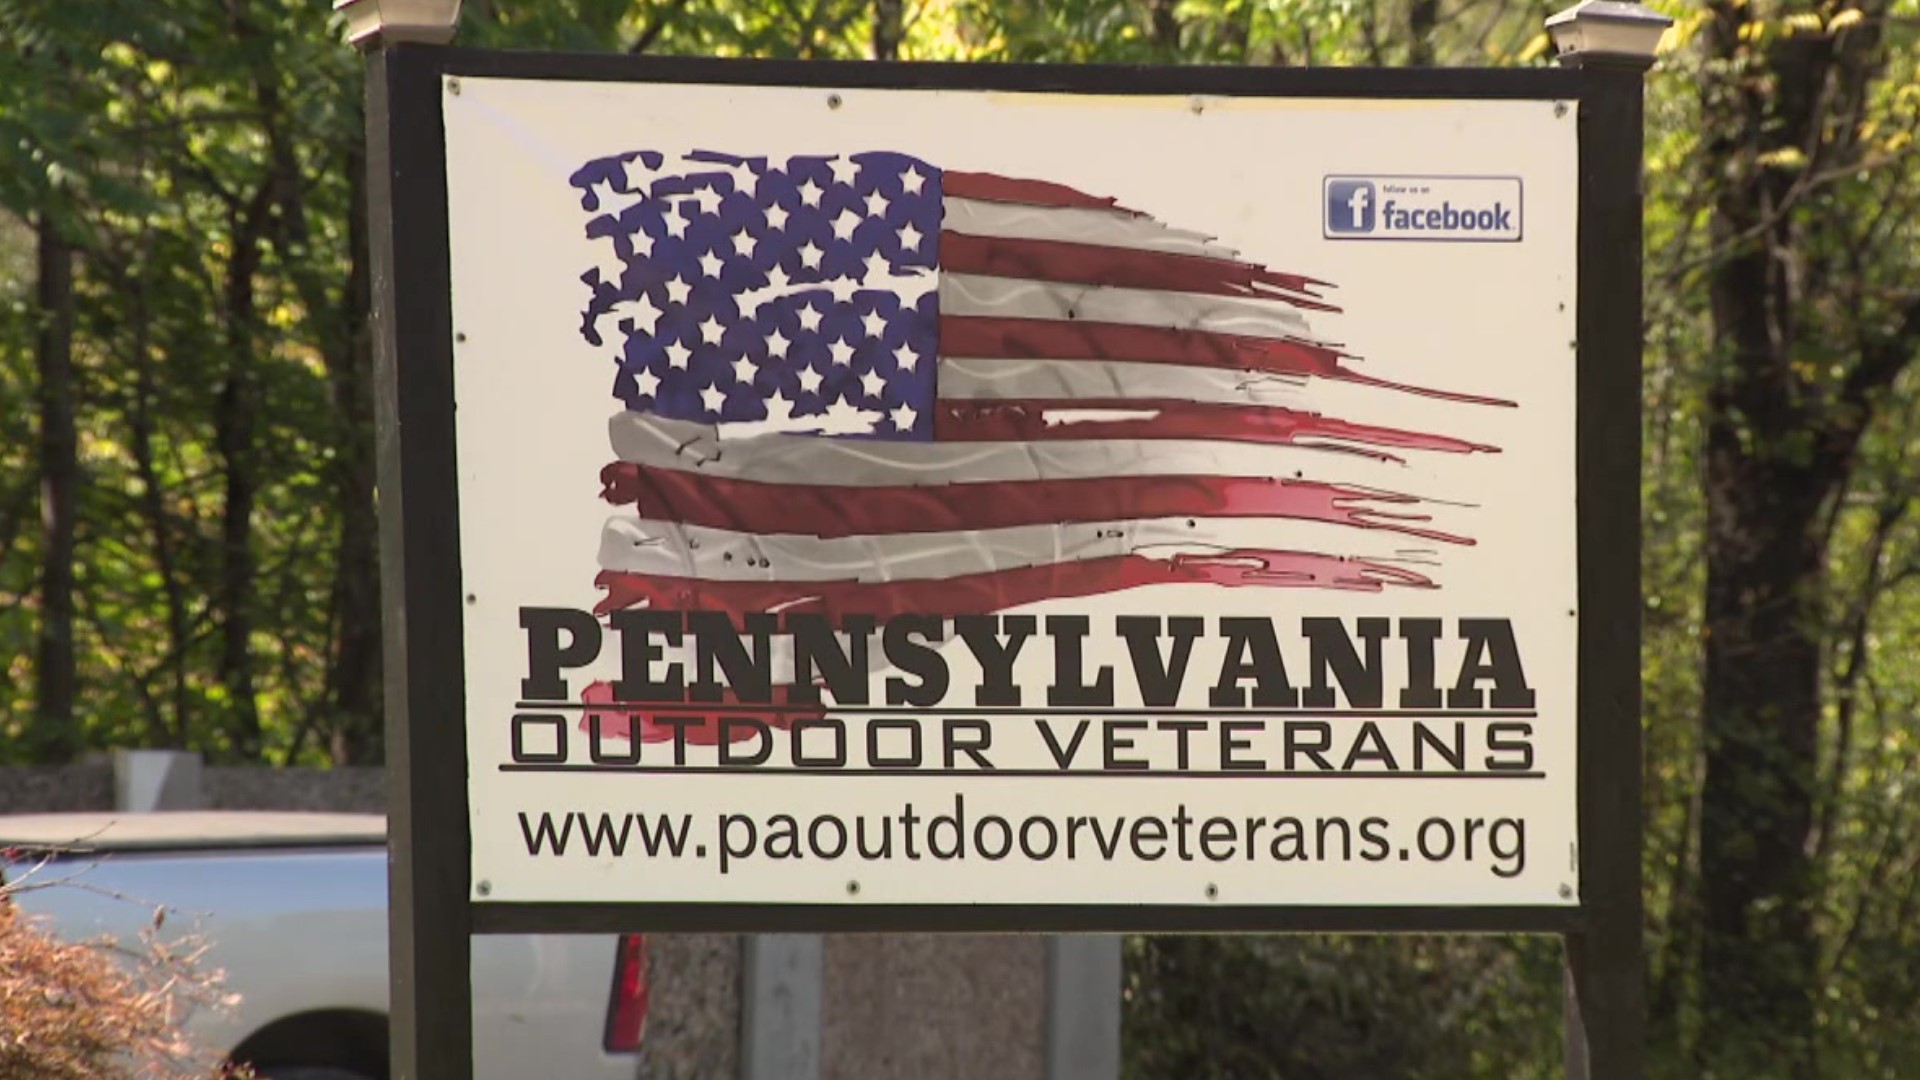 Newswatch 16's Amanda Eustice shows us how nature is bringing veterans together.